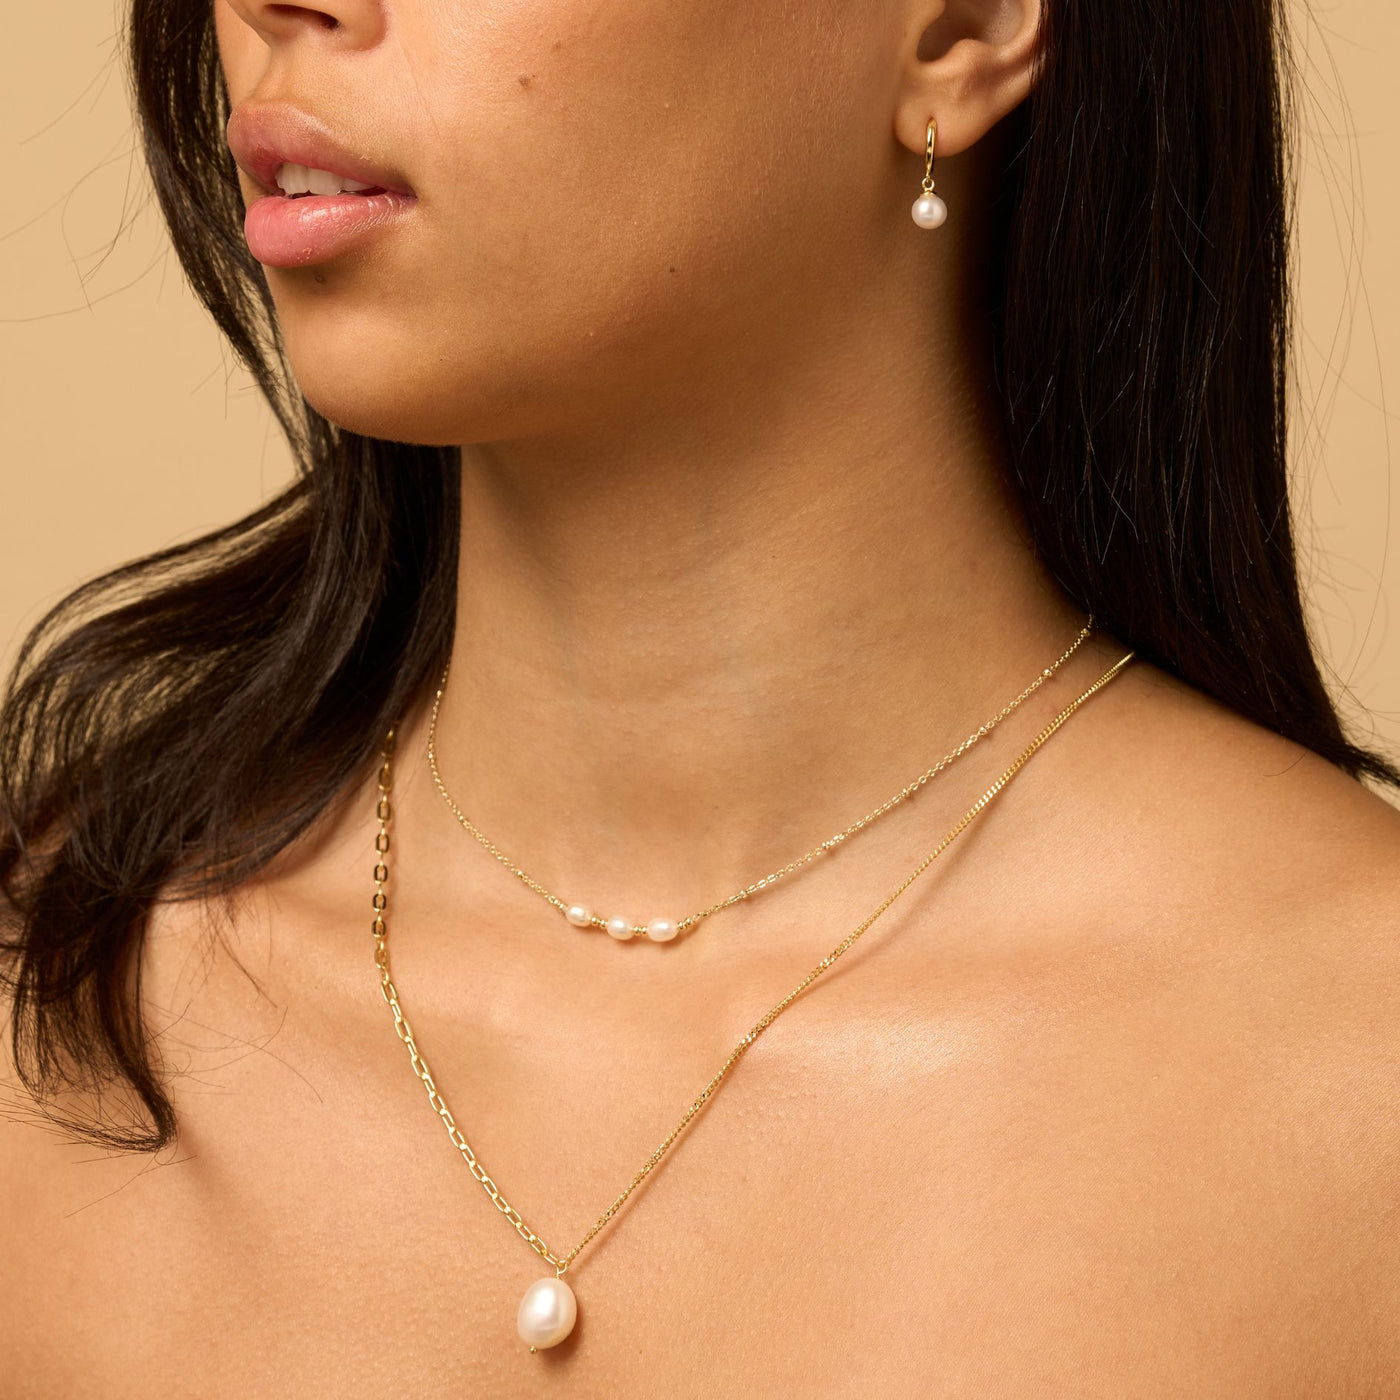 Two Chain Freshwater Pearl Necklace